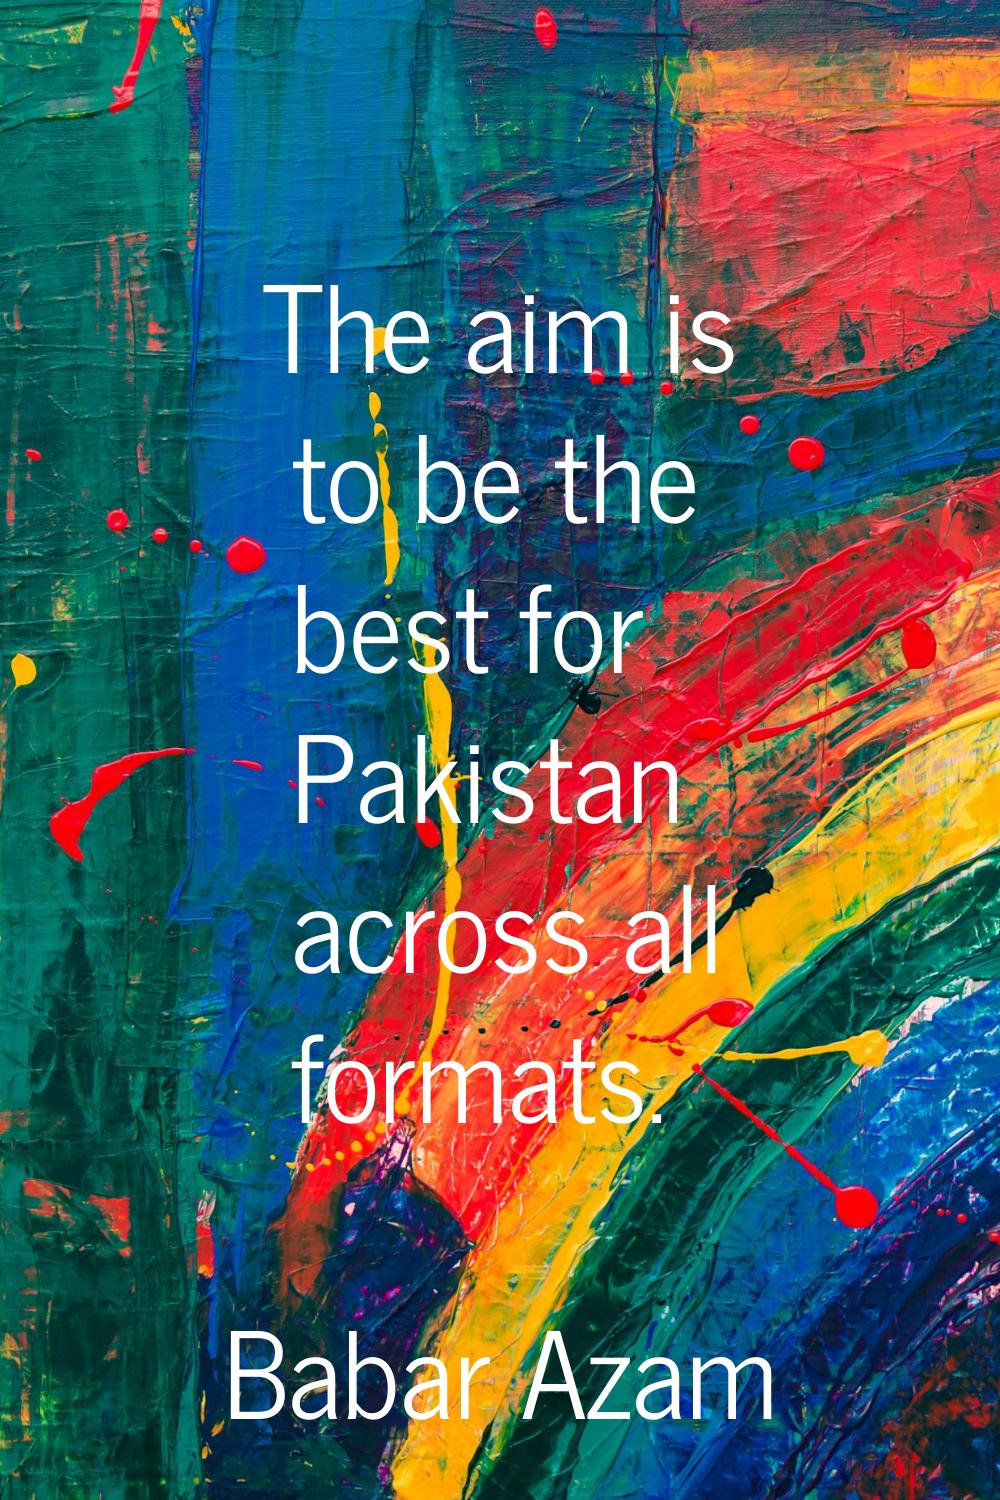 The aim is to be the best for Pakistan across all formats.